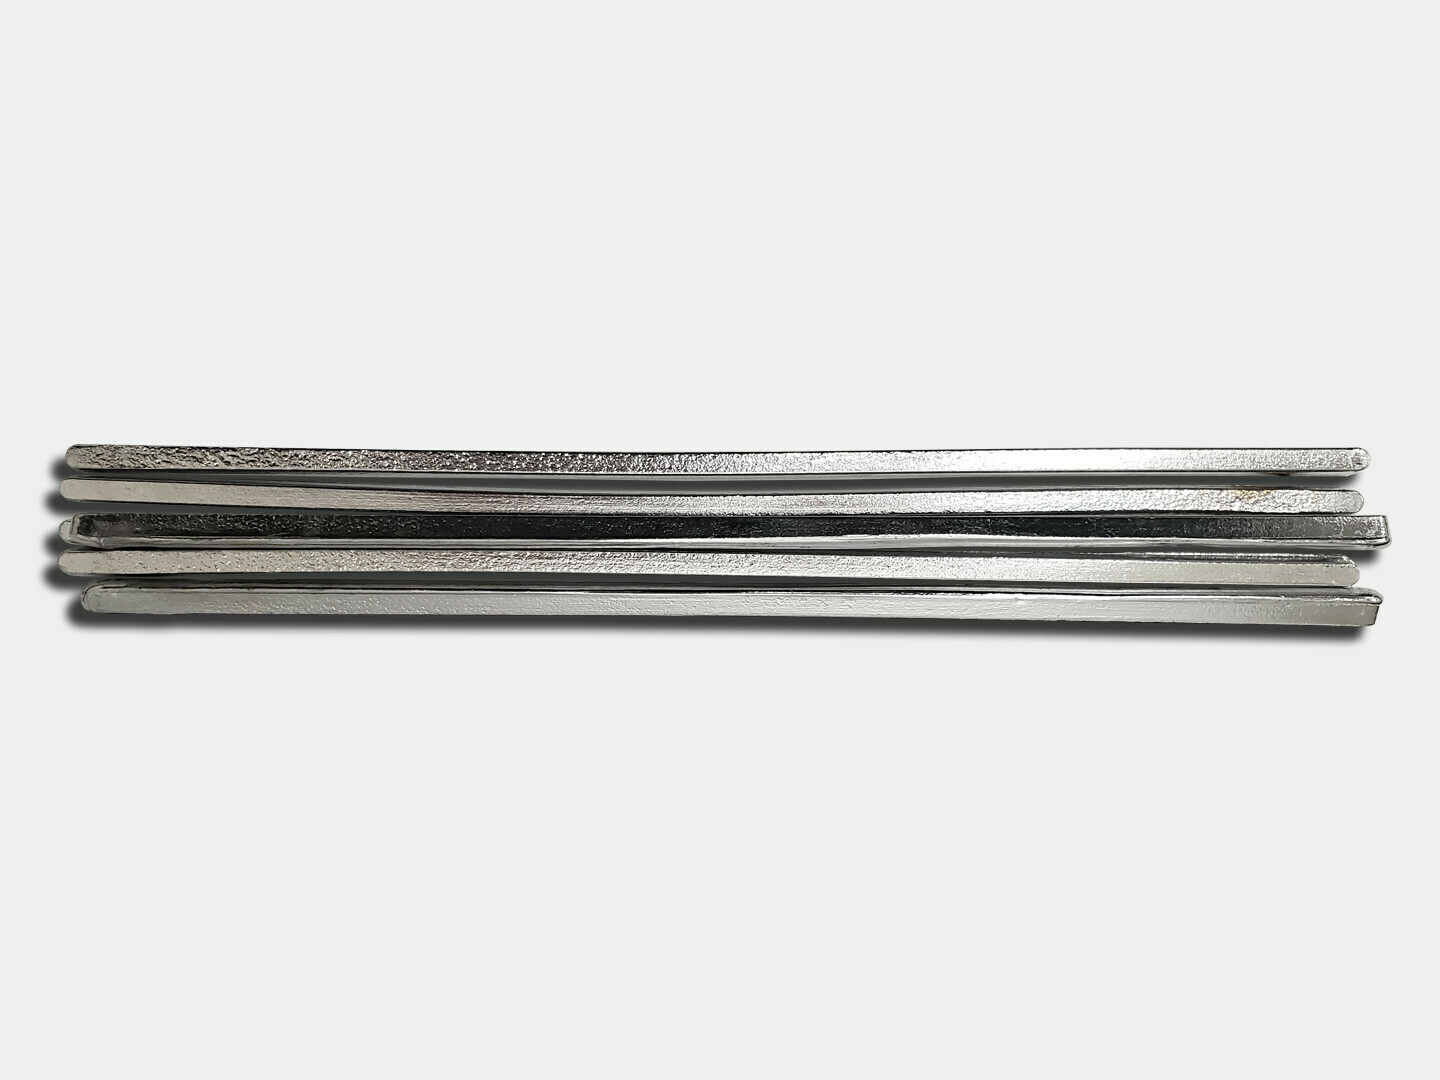 20 pounds MZ0601 20 AIM Lead Tin Alloy 50/50 Solder Bar 13.5" USA Sale Only